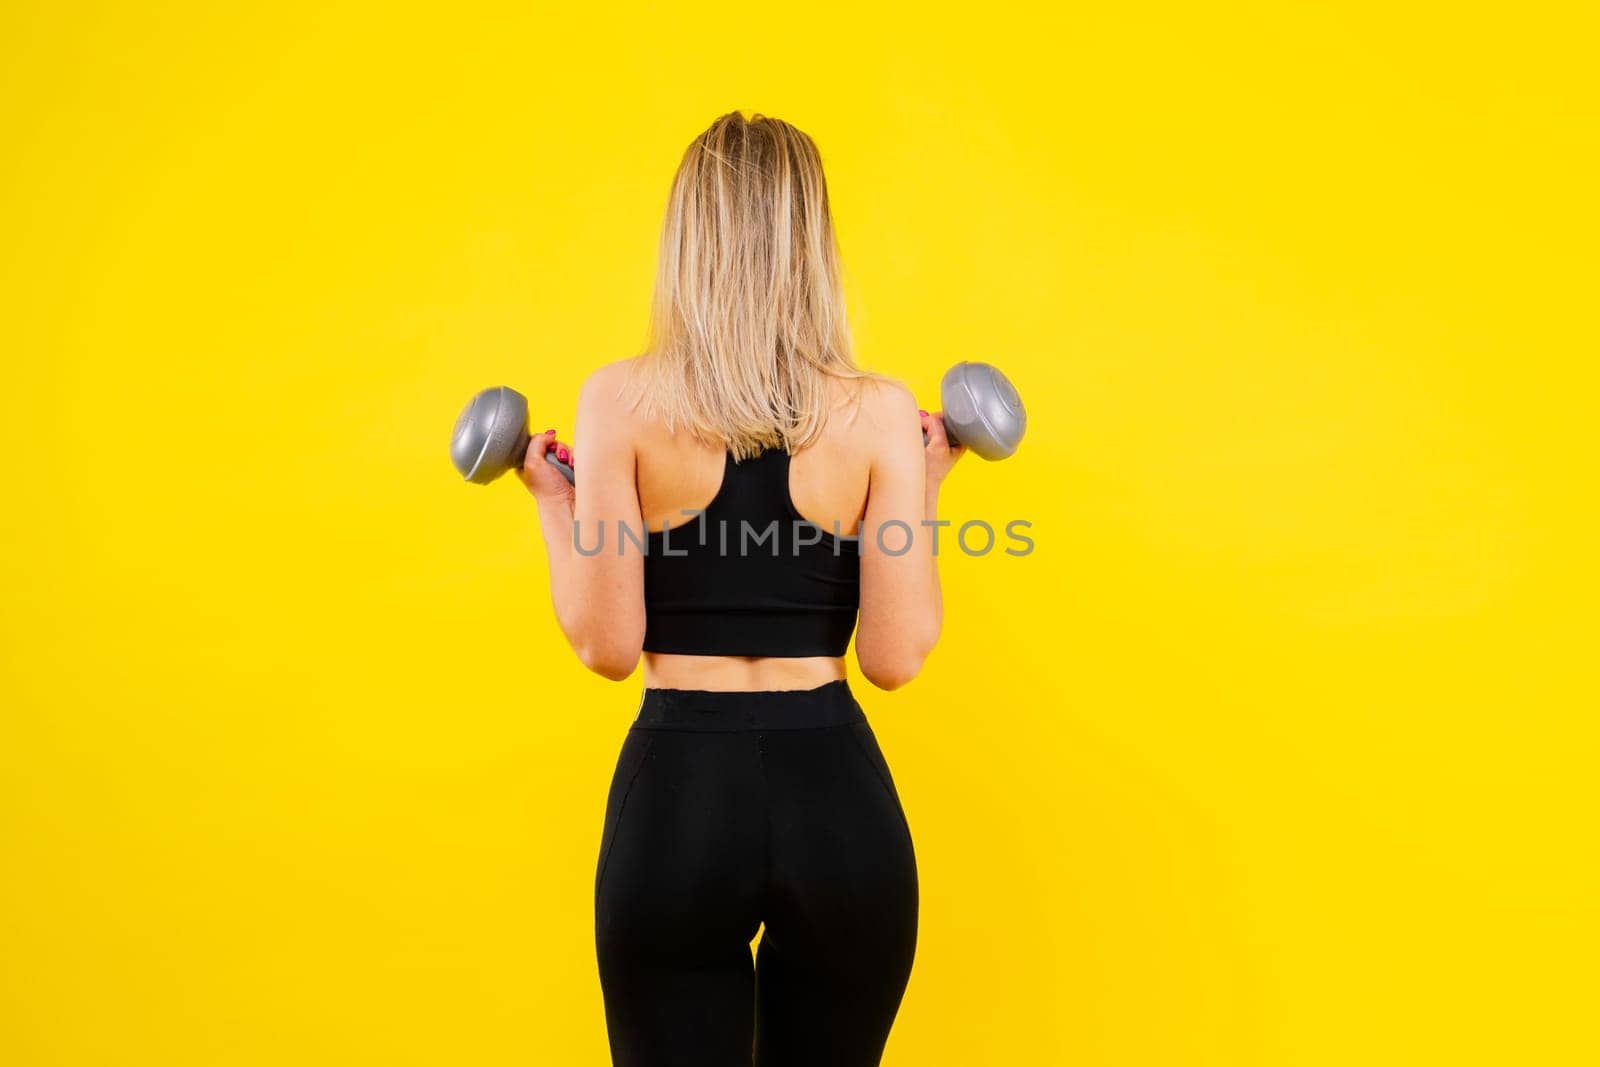 Middle aged woman doing fitness workout, standing on activewear with abs and muscles, smiling happy